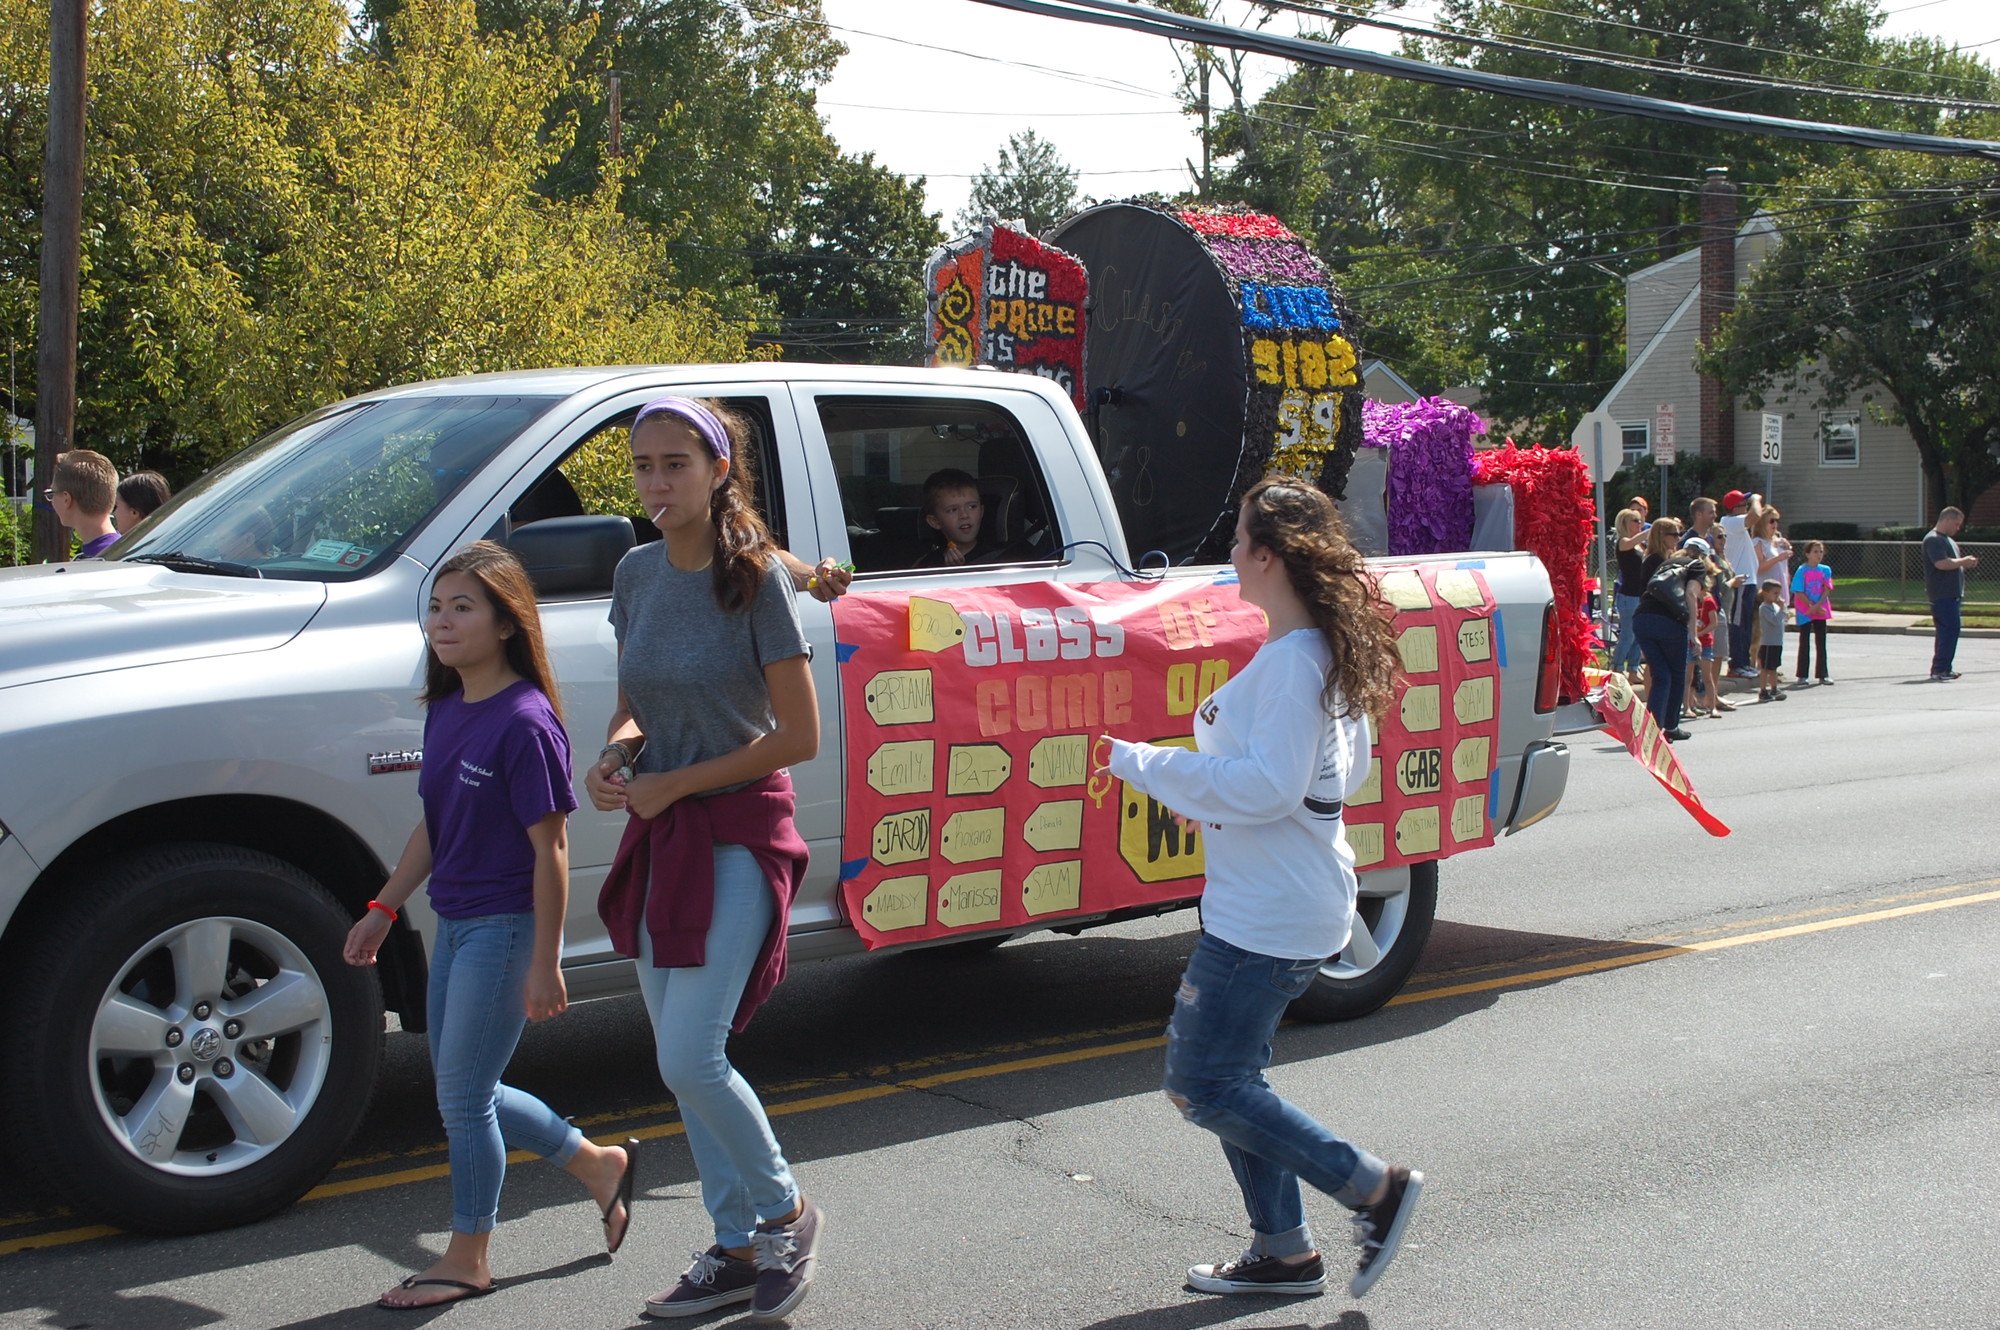 The sophomore class had the winning float in the game show-themed competition.